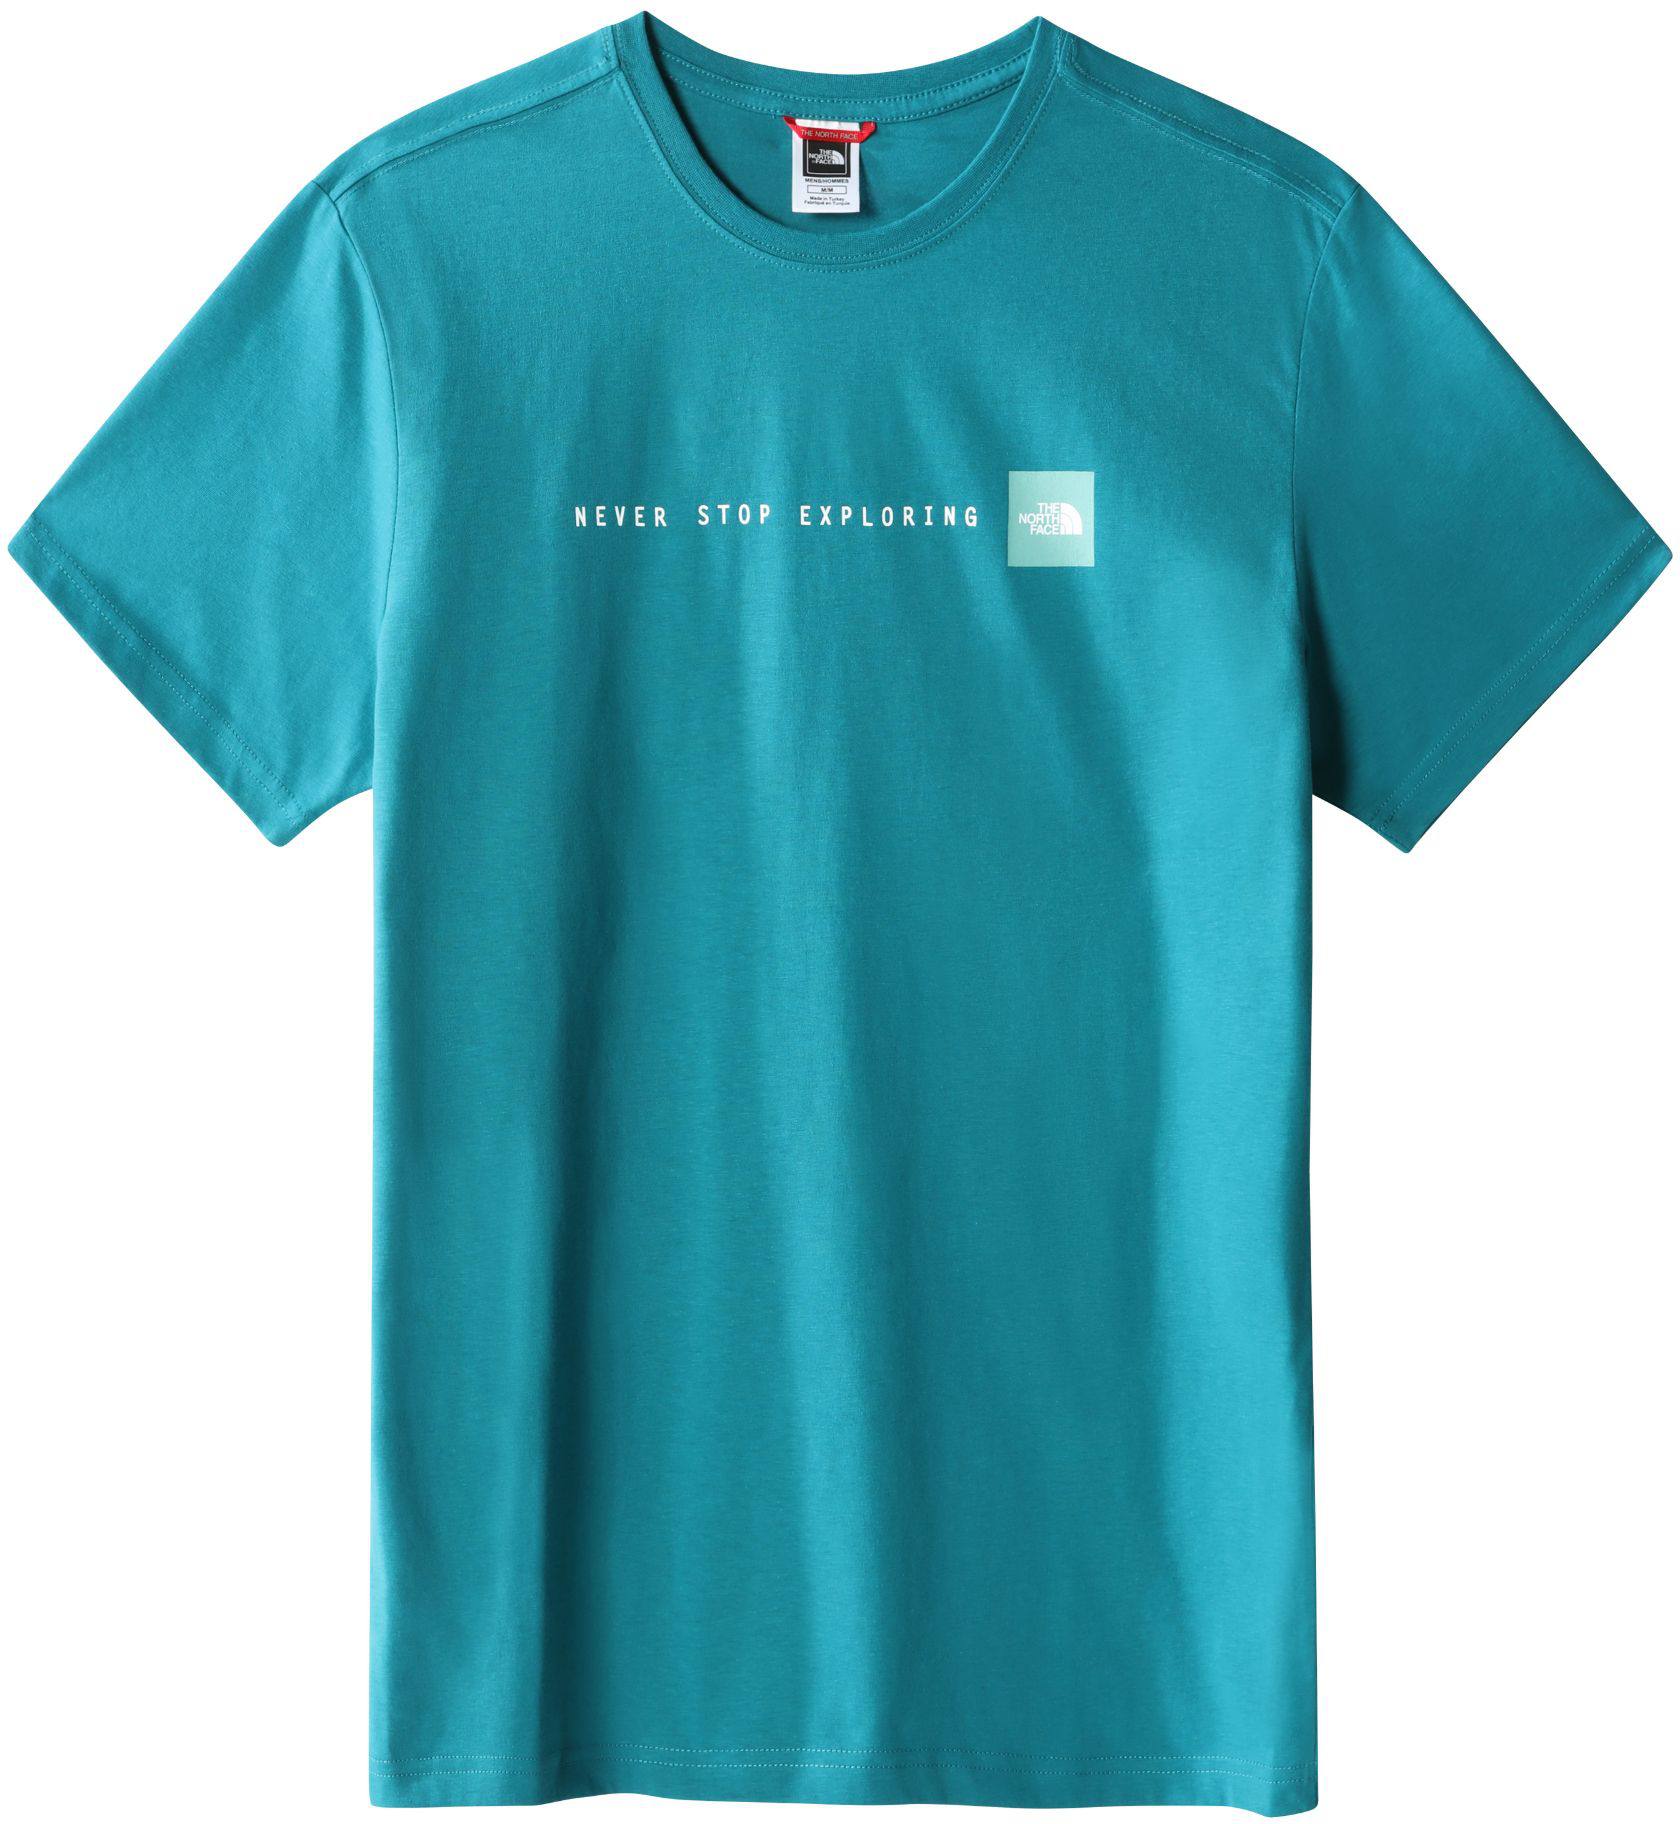 Image of The North Face Never Stop Exploring Tee